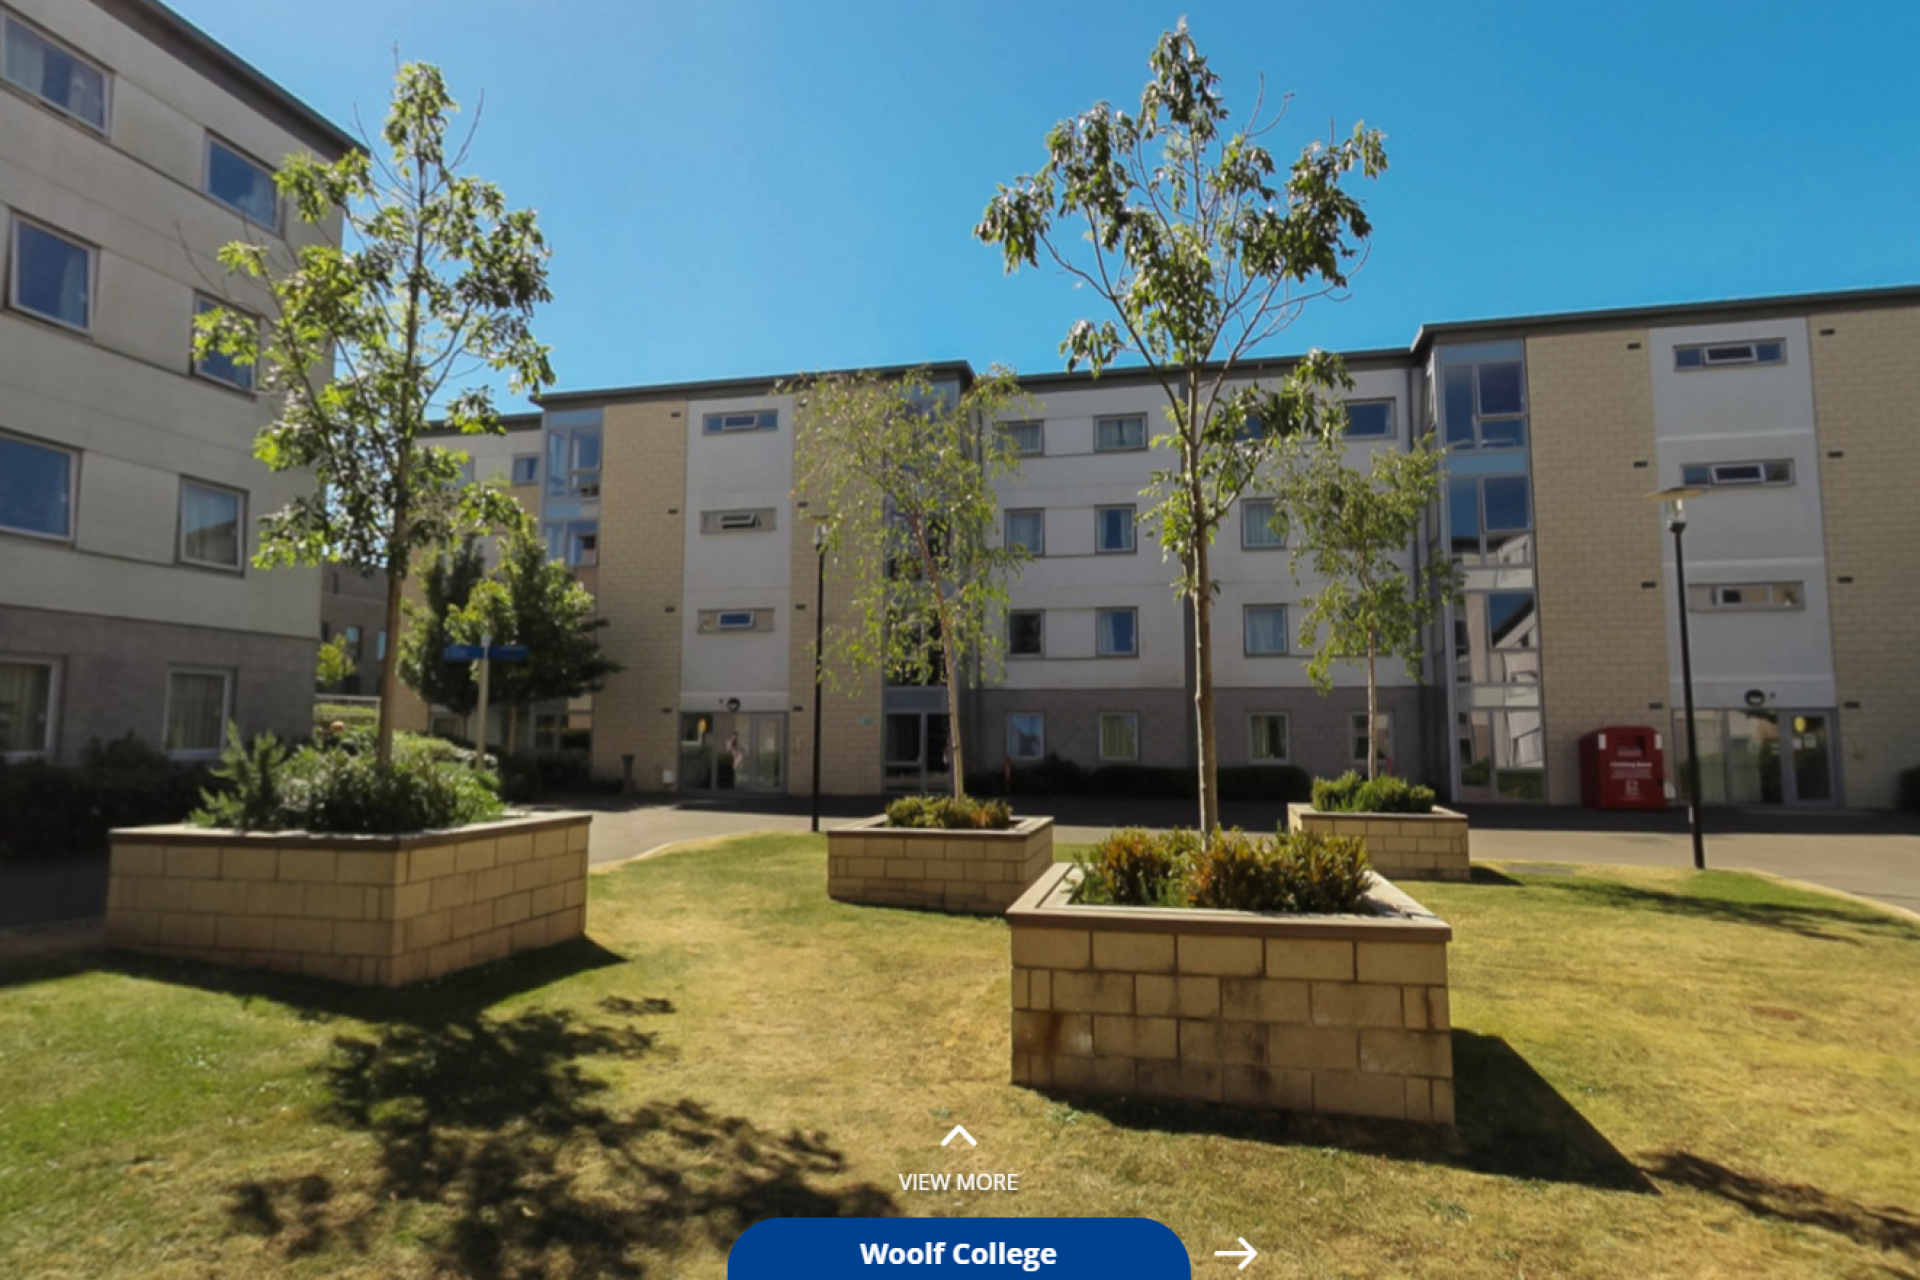 Woolf College courtyard shown on virtual tours